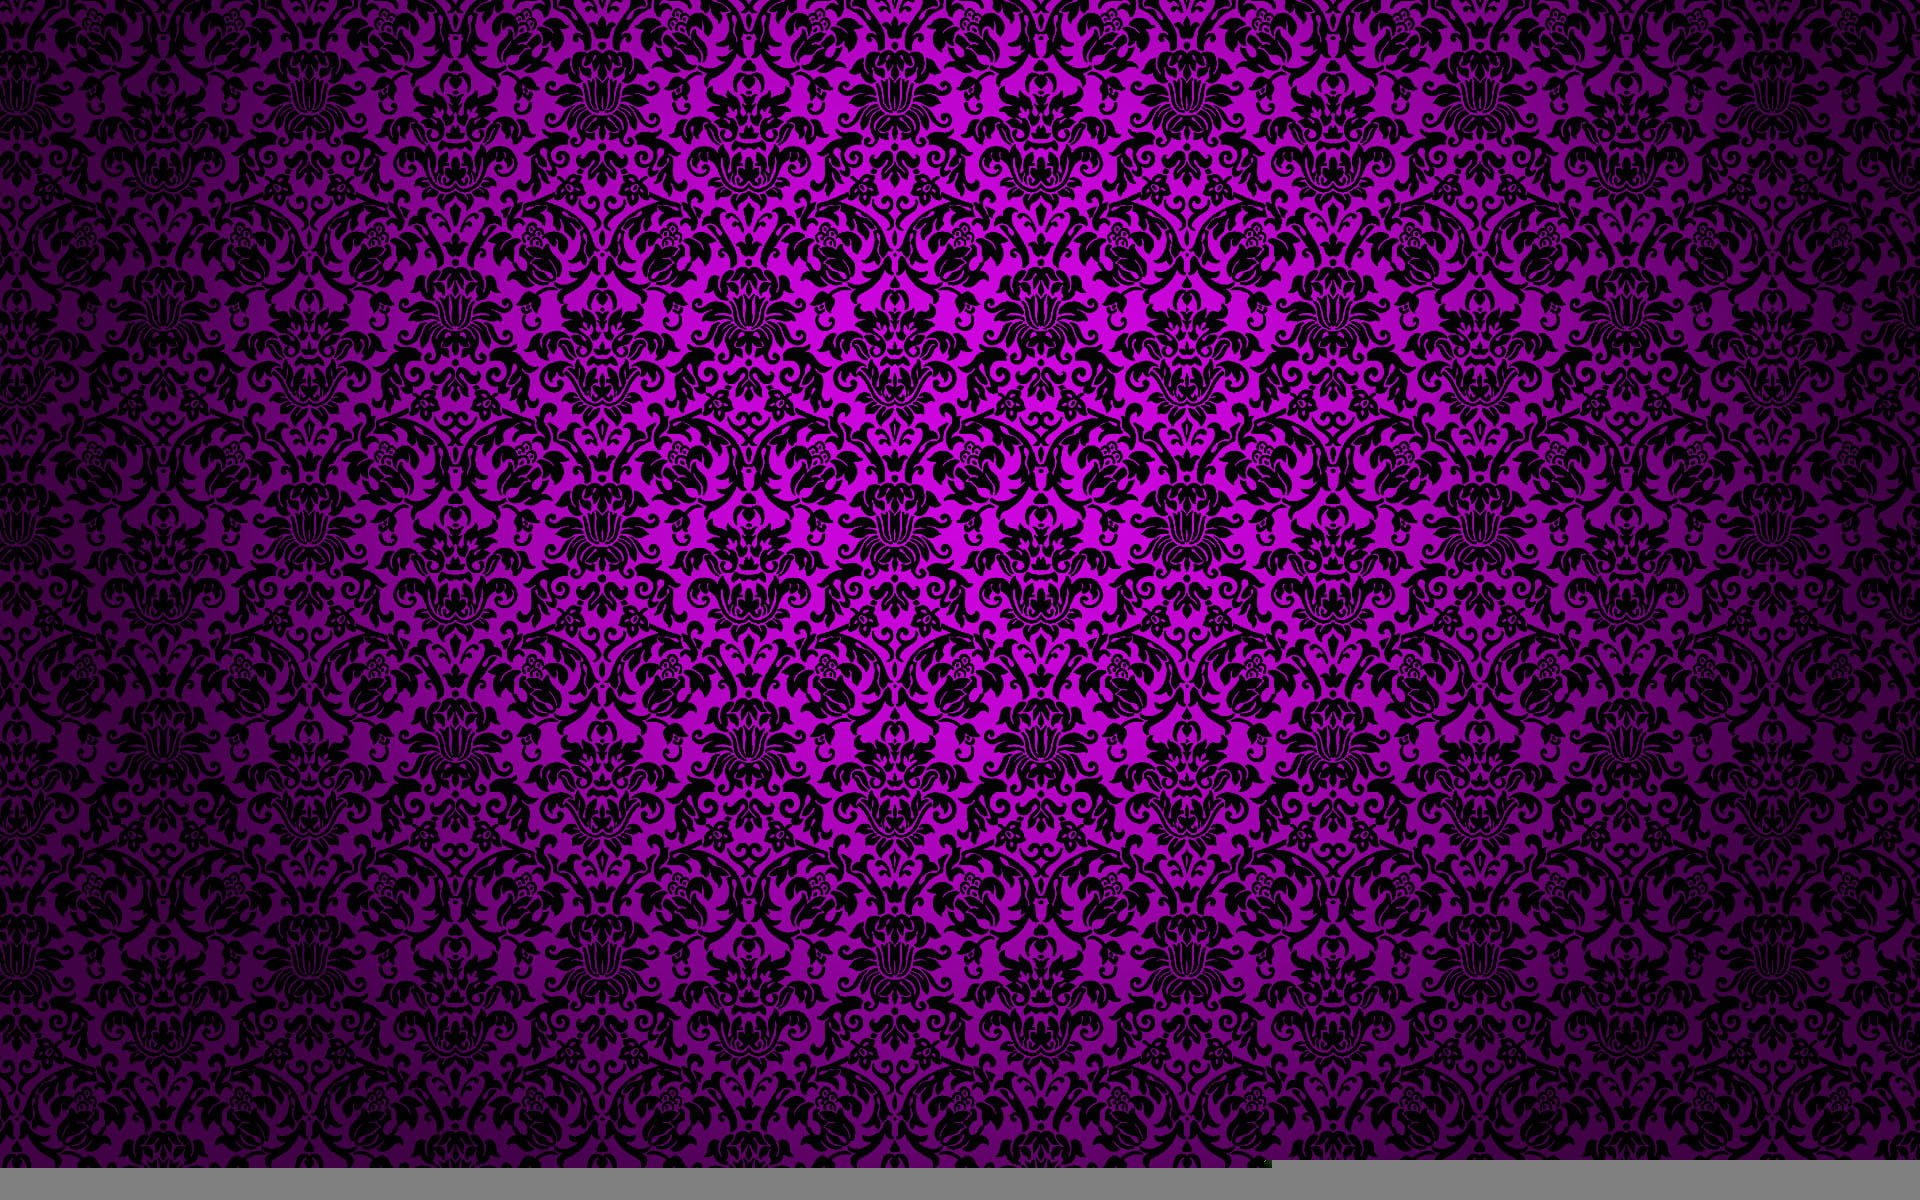 purple and black floral wallpaper, patterns, texture, backgrounds